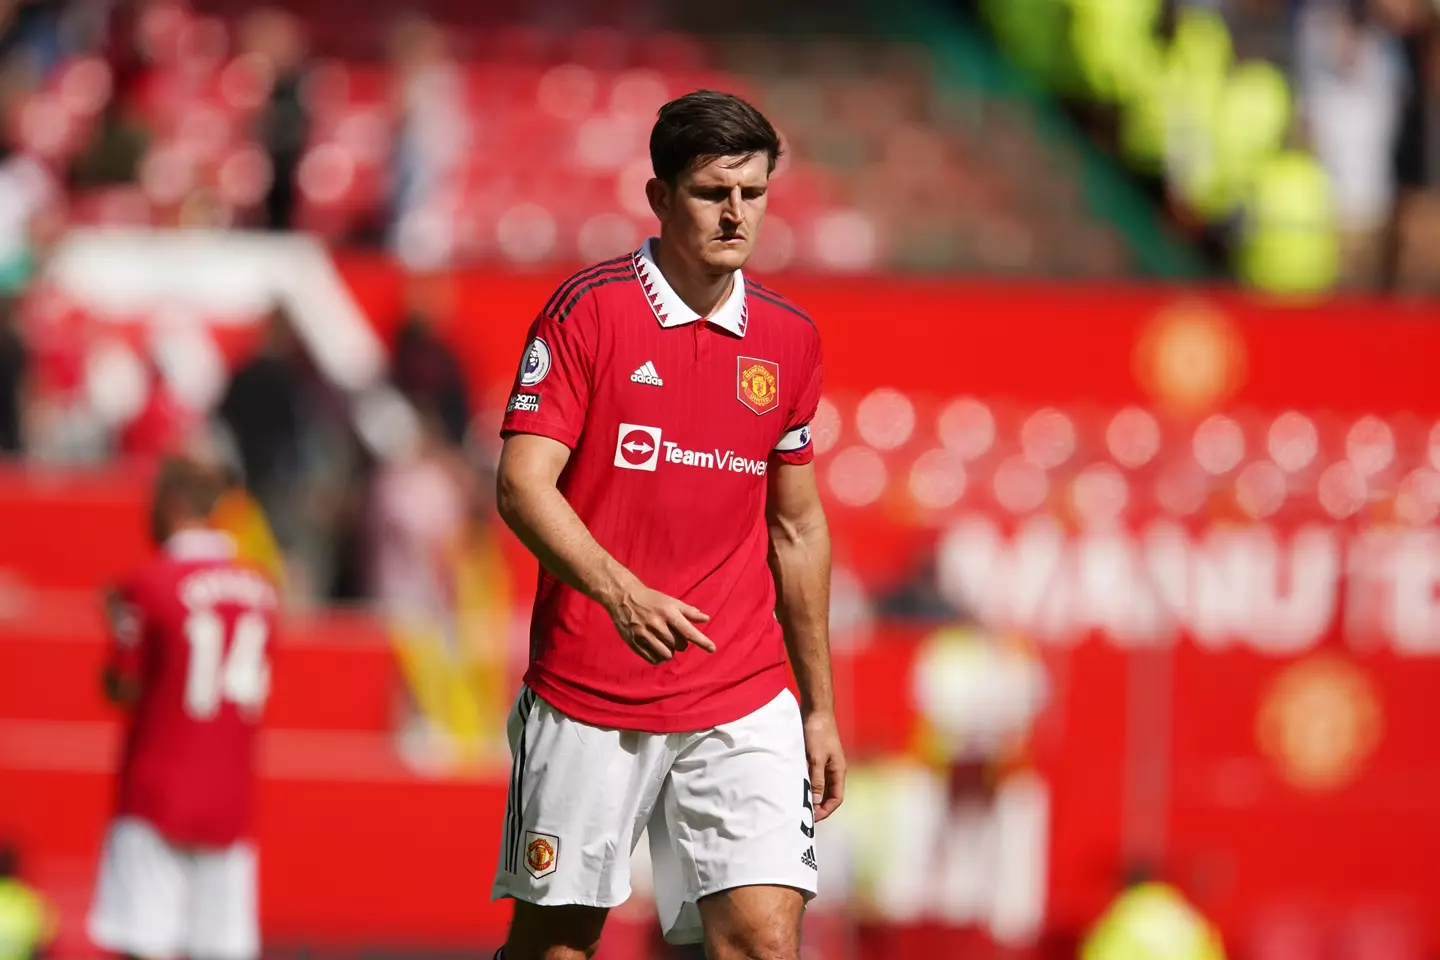 Maguire following United's 2-1 defeat to Brighton. (Image